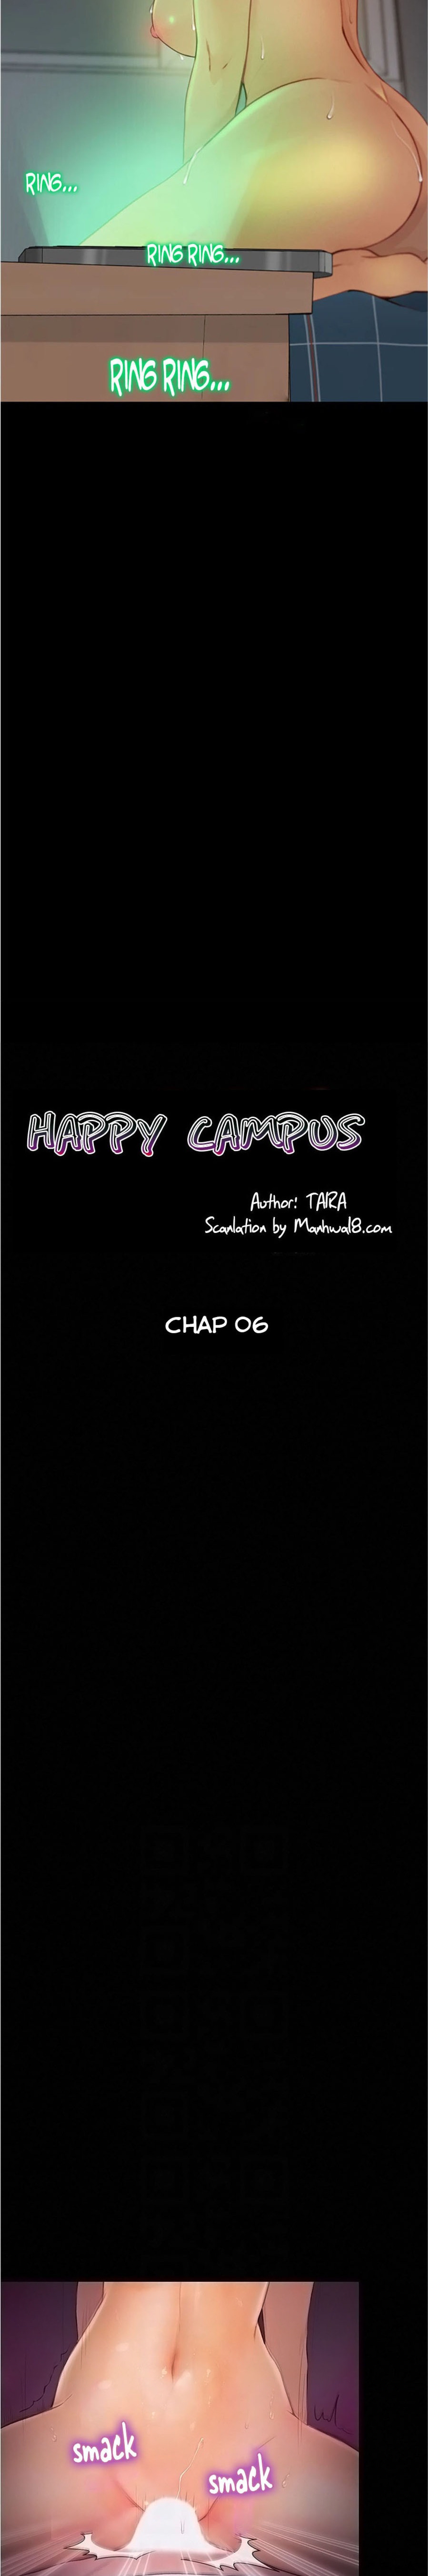 Happy Campus - Chapter 6 Page 2